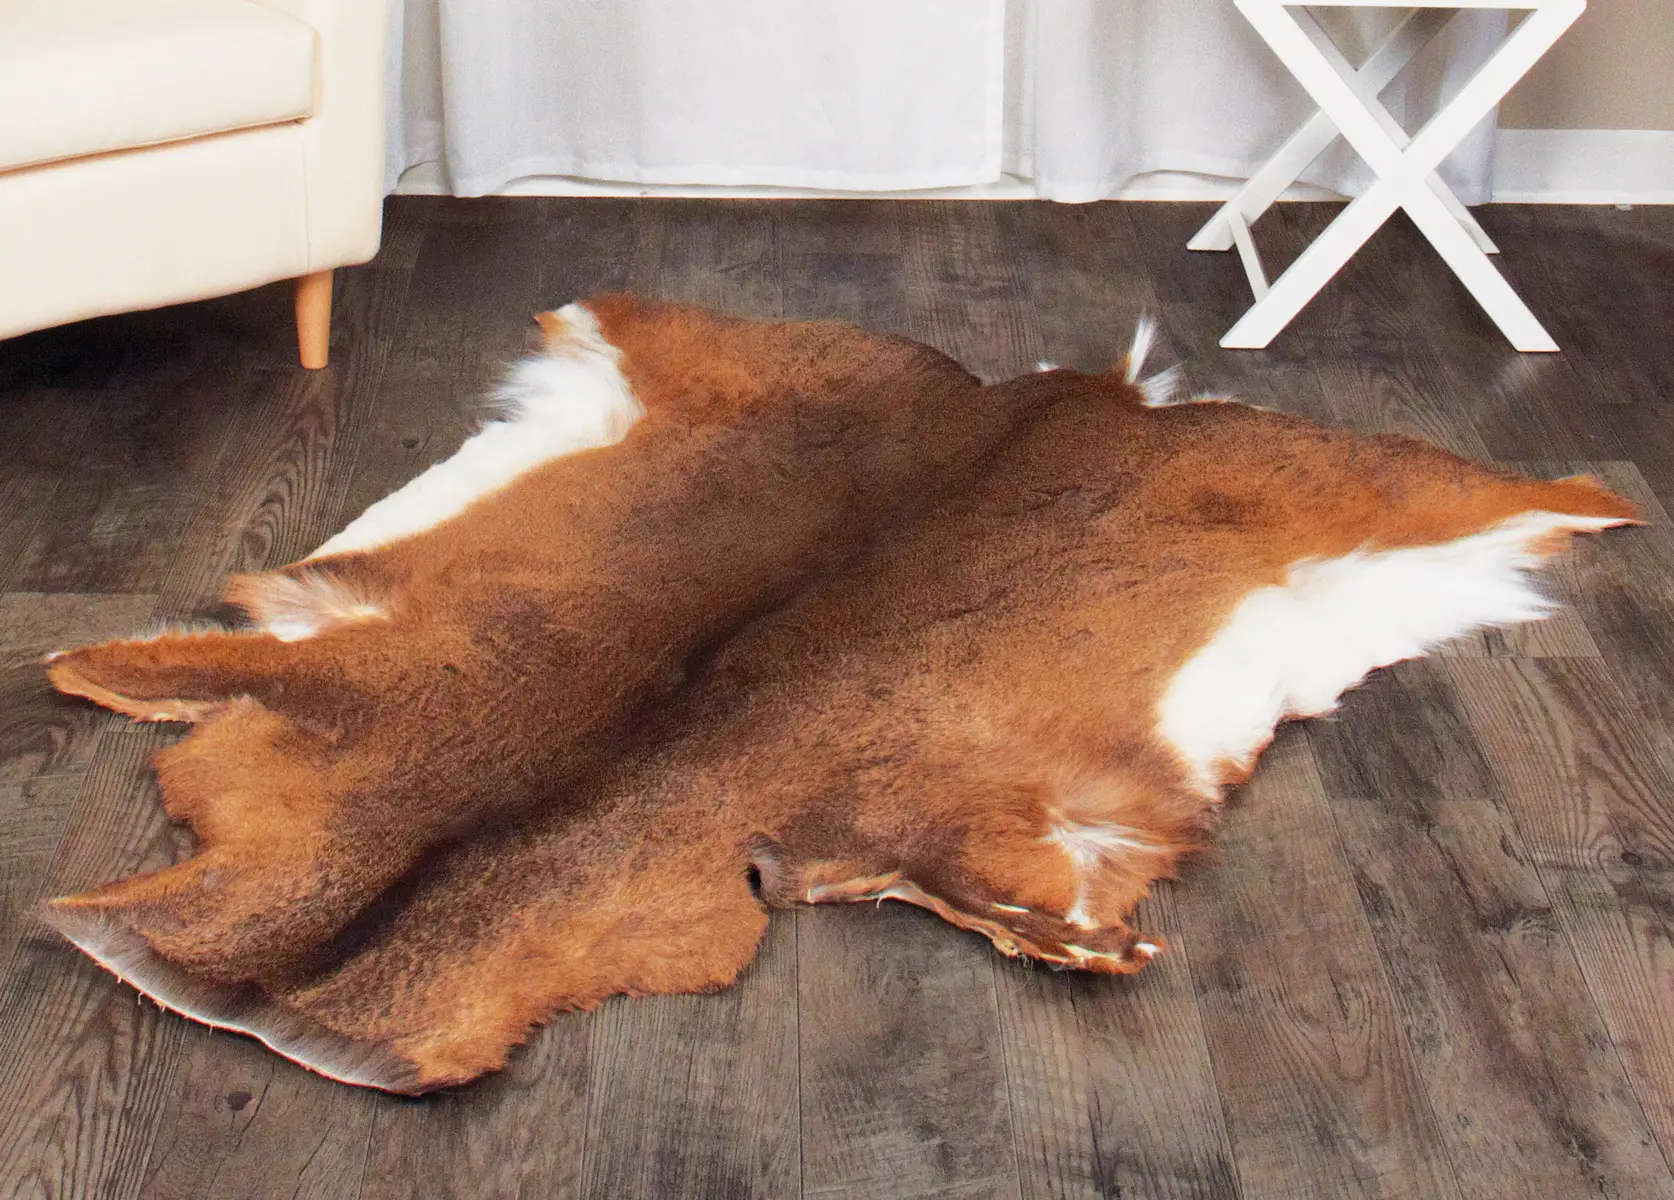 h2 Maximize Your Harvest: Discover Creative Uses for Deer Hides